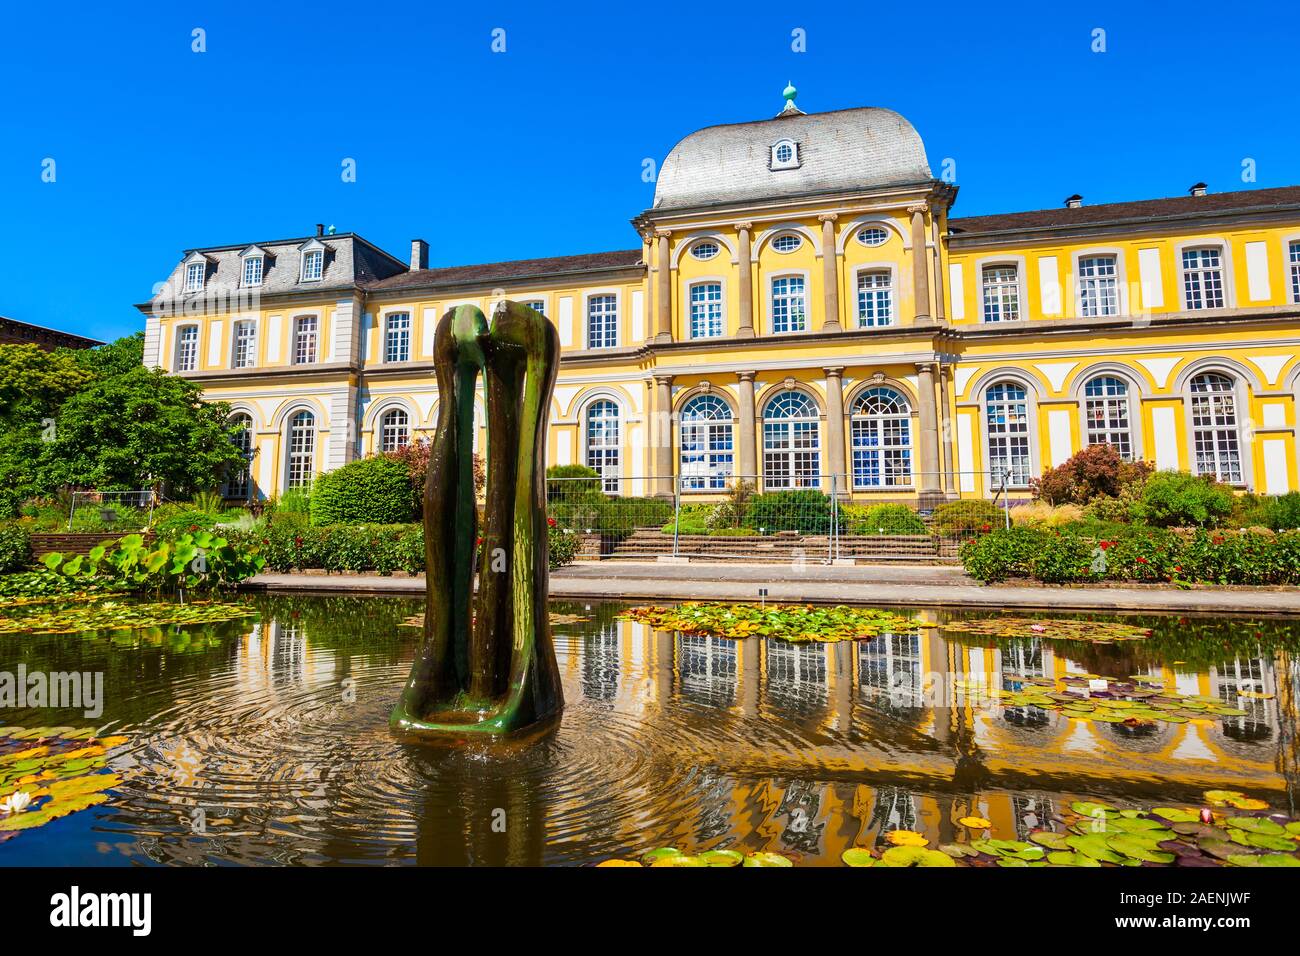 Poppelsdorf Palace is a baroque building in Bonn city, Germany Stock Photo